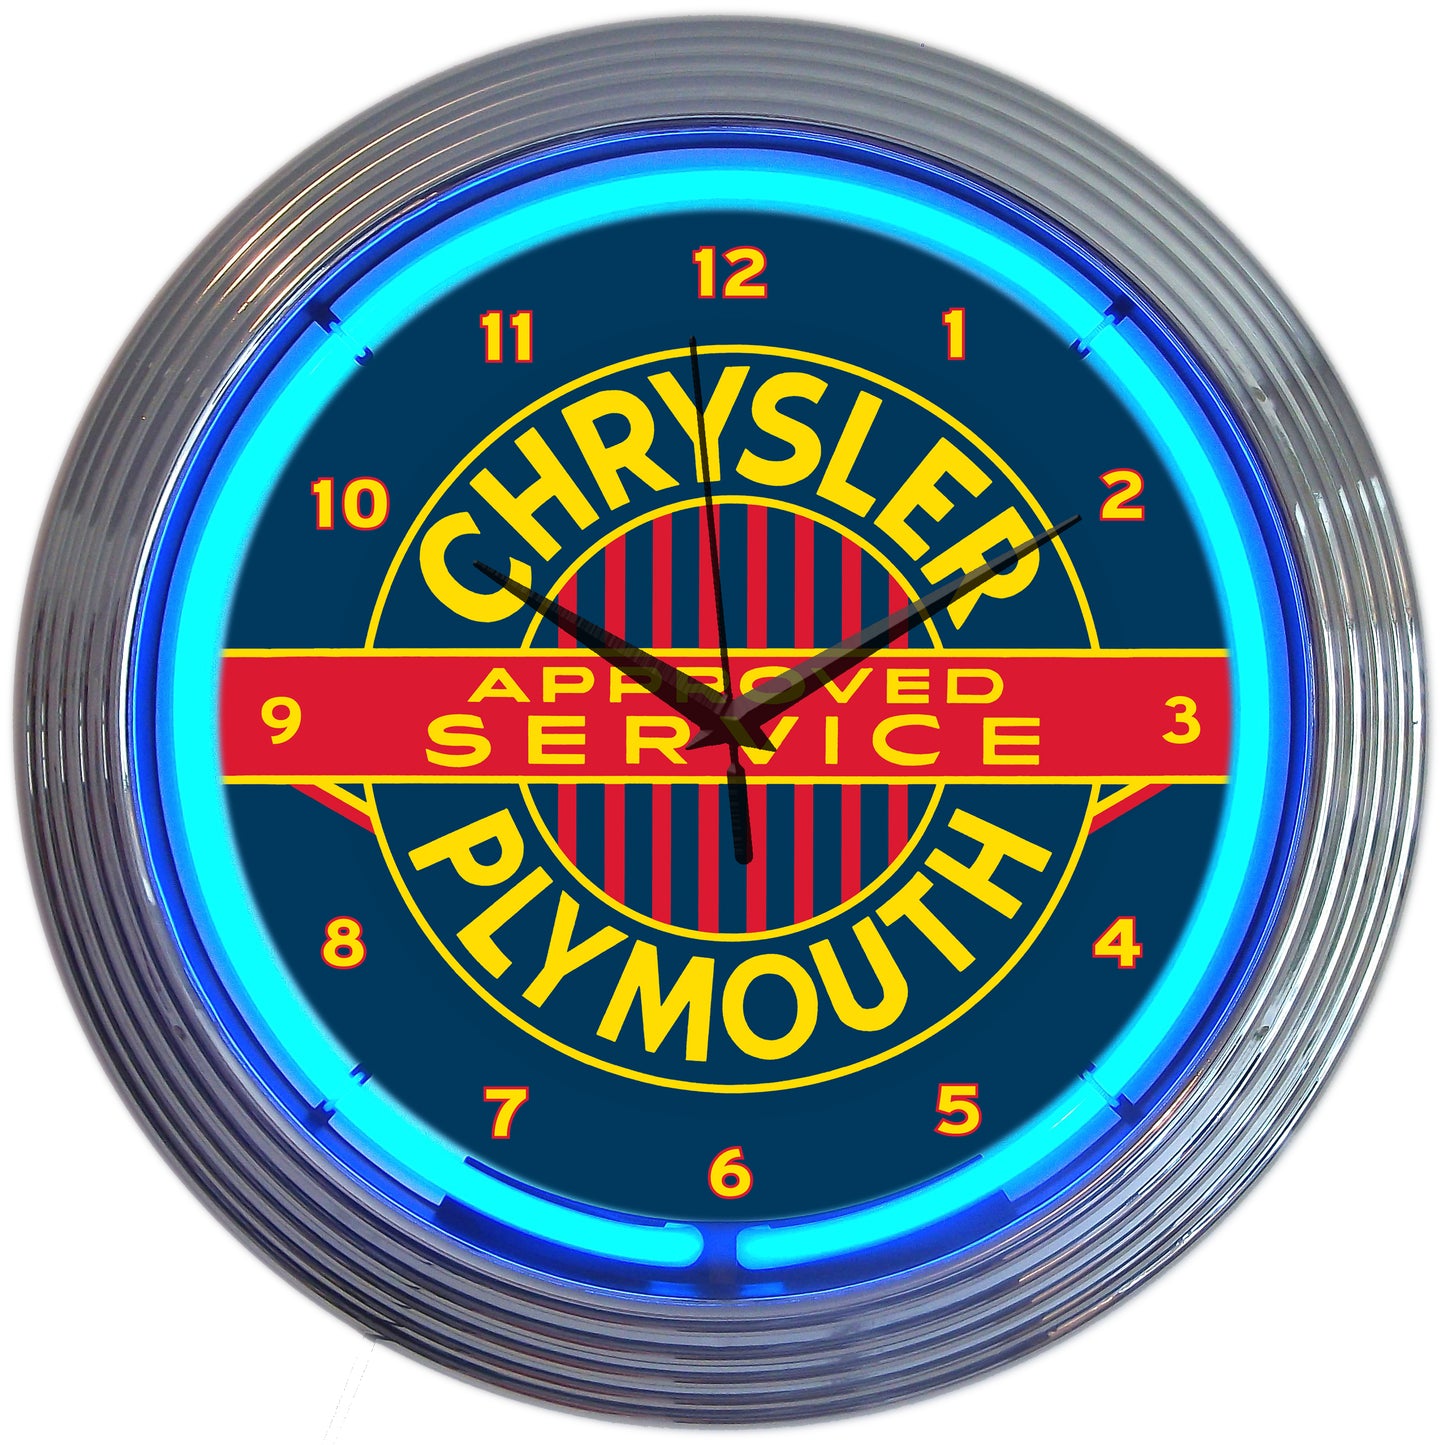 Chrysler Plymouth Approved Service Neon Clock